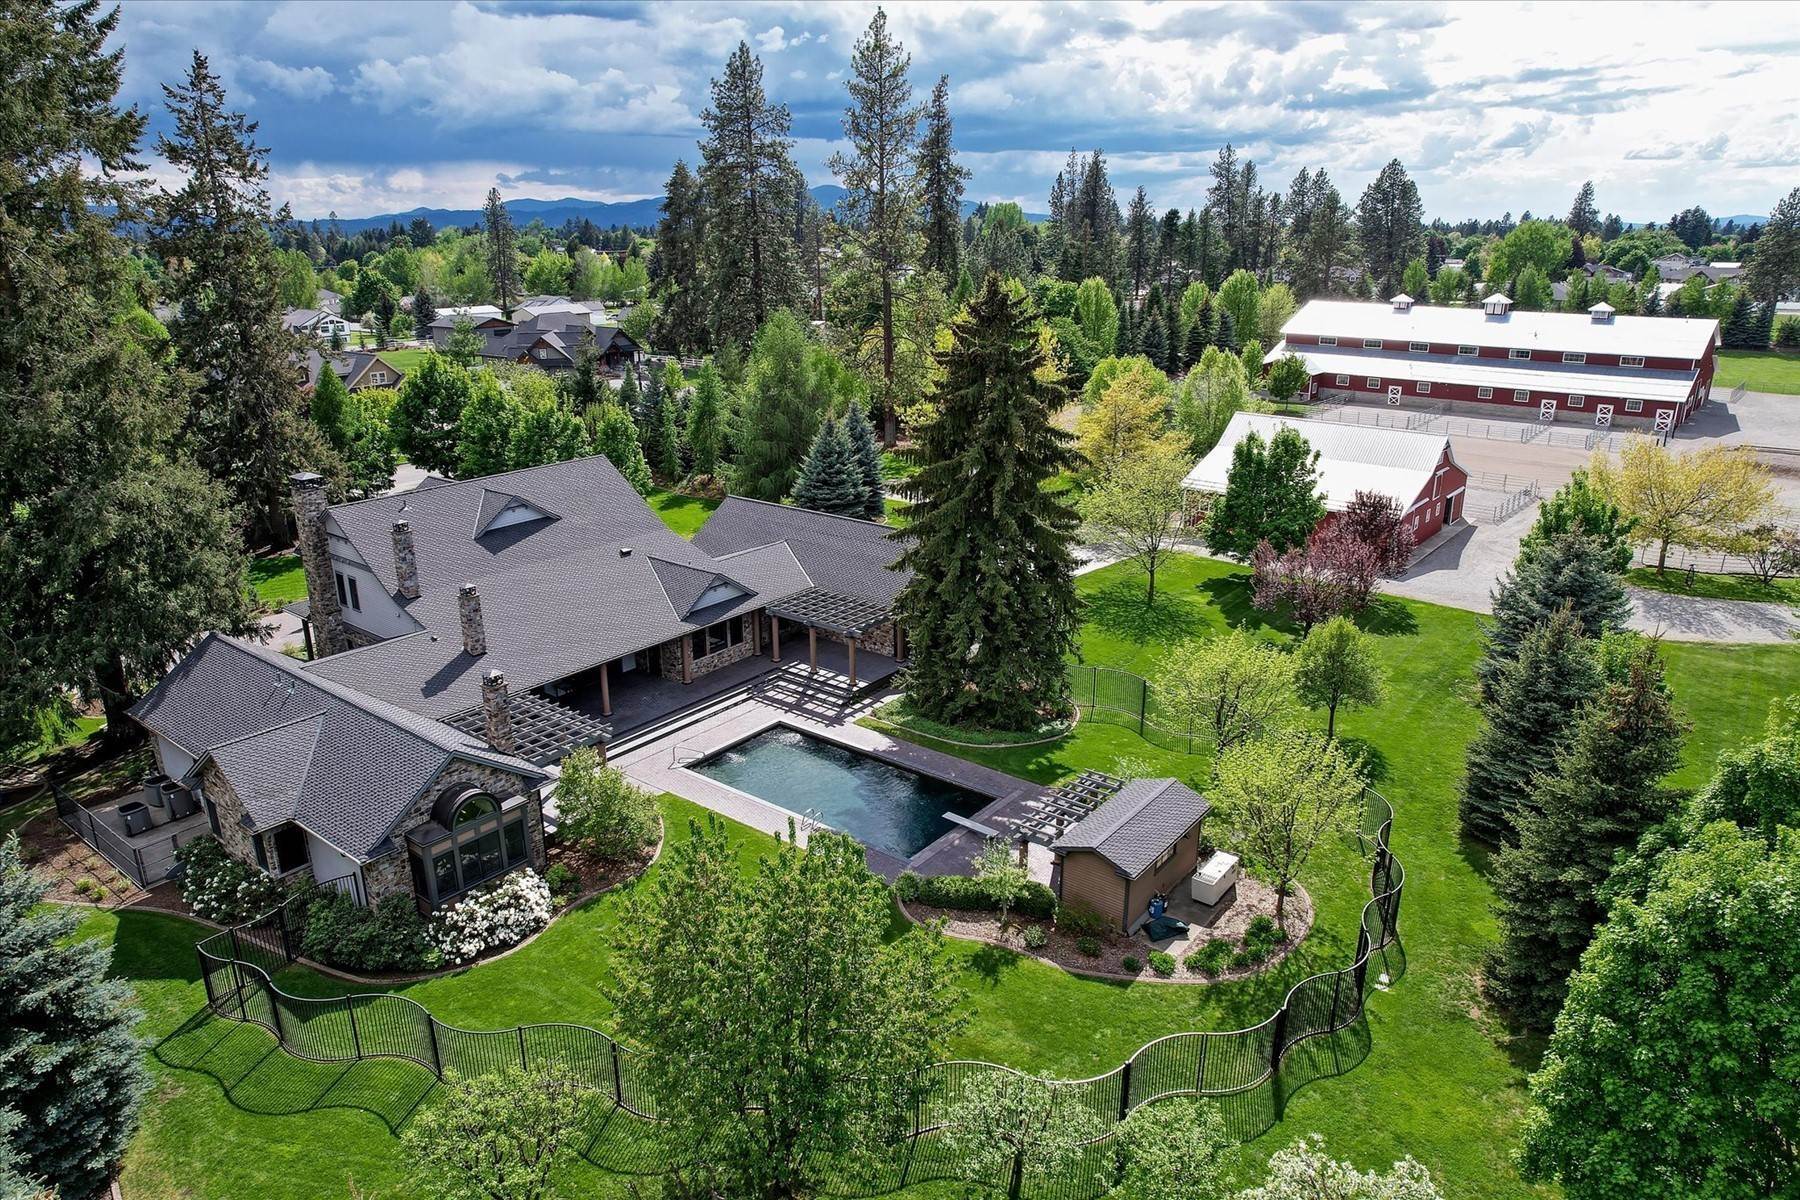 Single Family Homes for Sale at Exquisite Equestrian Property in Town 1345 & 1221 Lacey Ave Hayden, Idaho 83835 United States